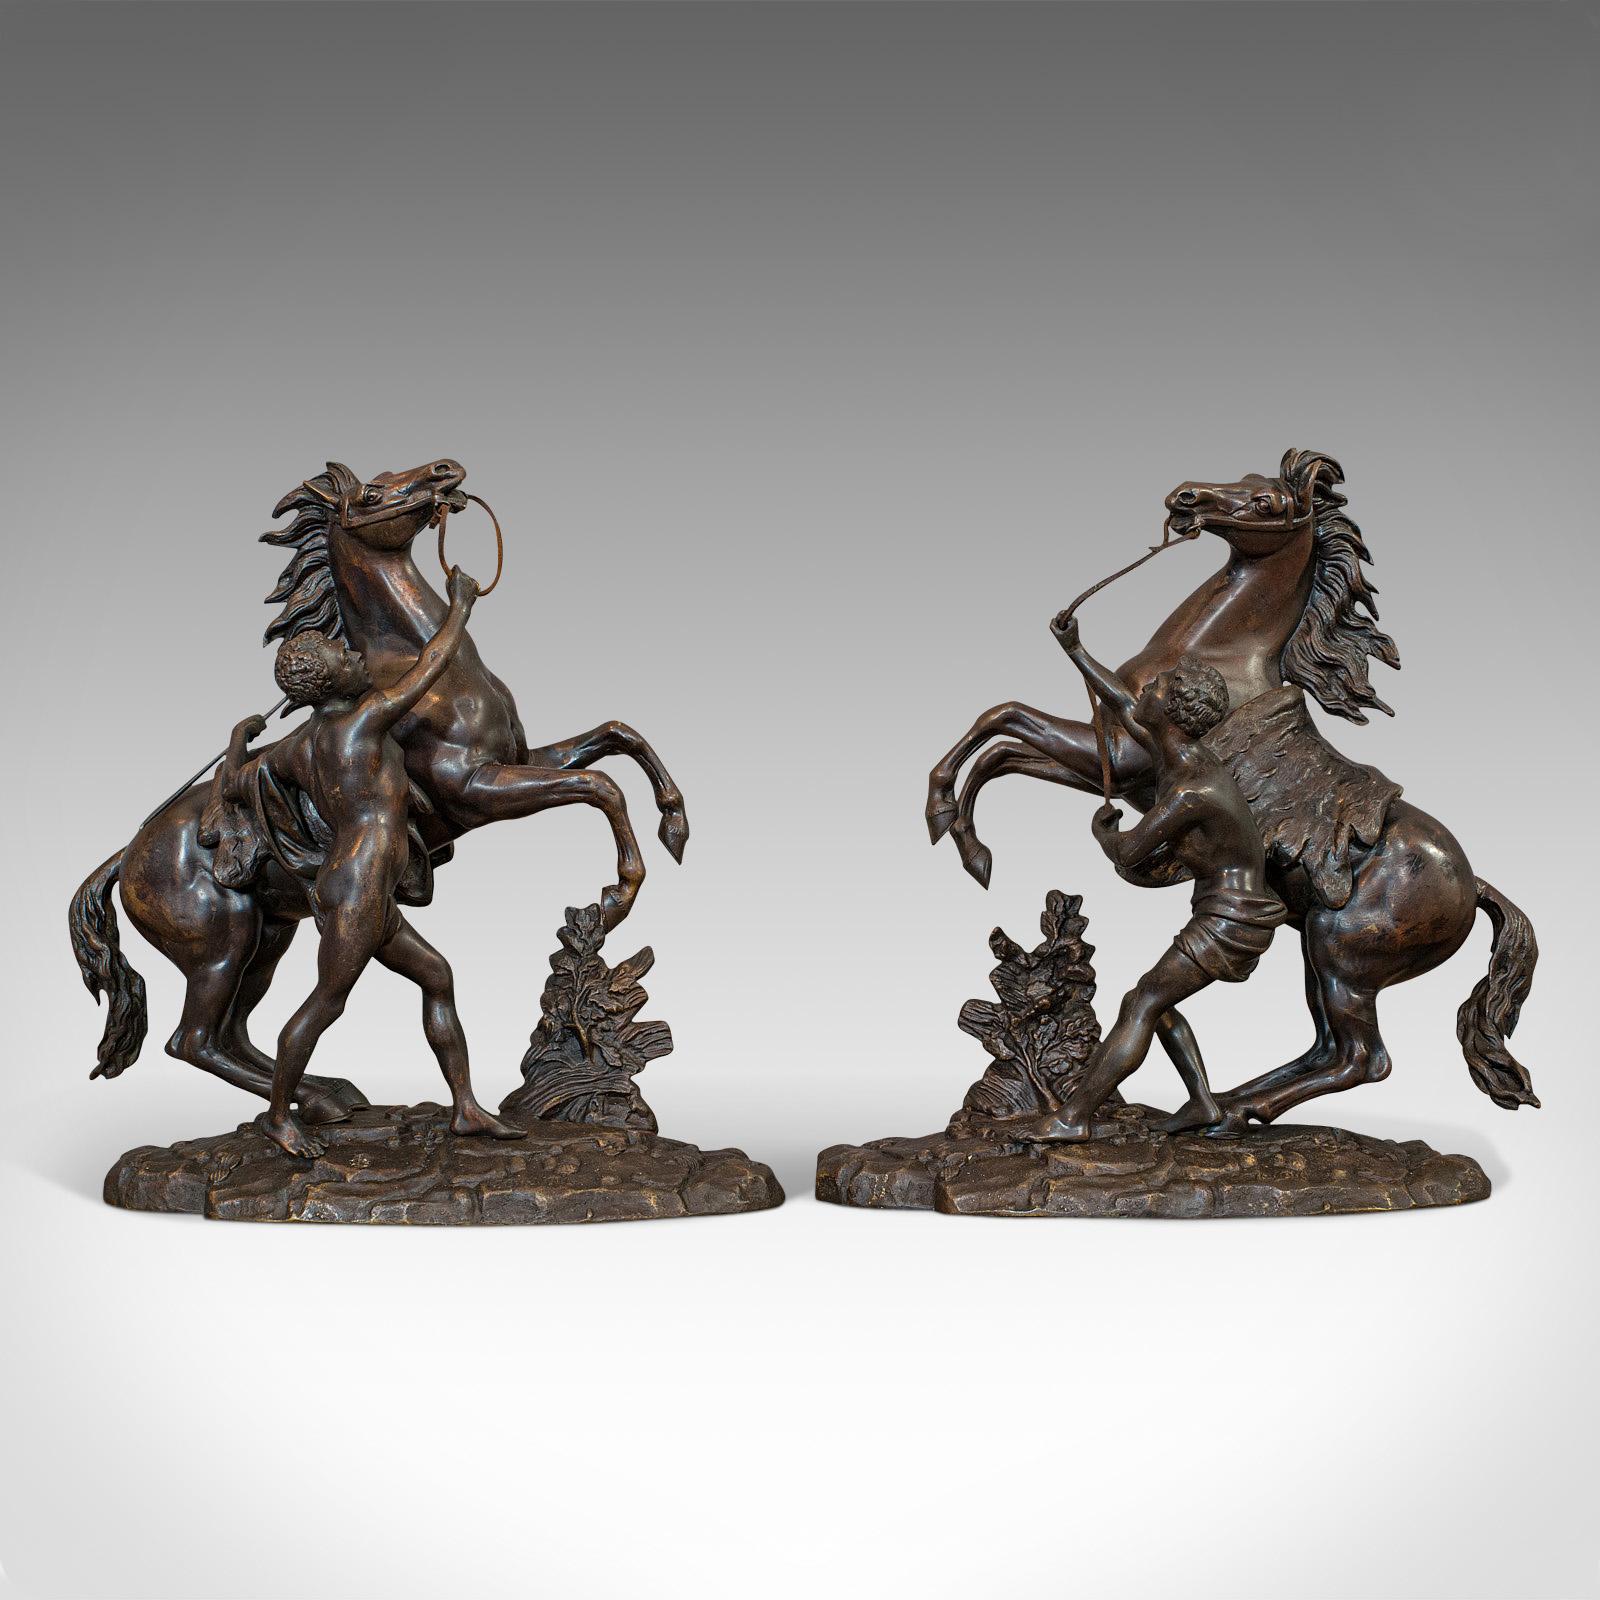 This is an antique pair of Marly horses. A French, bronze equestrian statue after Guillaume Coustou (1677-1746), dating to the late 19th century, circa 1900.

Beguiling representations of the famous Marly marble horses - now in the Louvre
Each